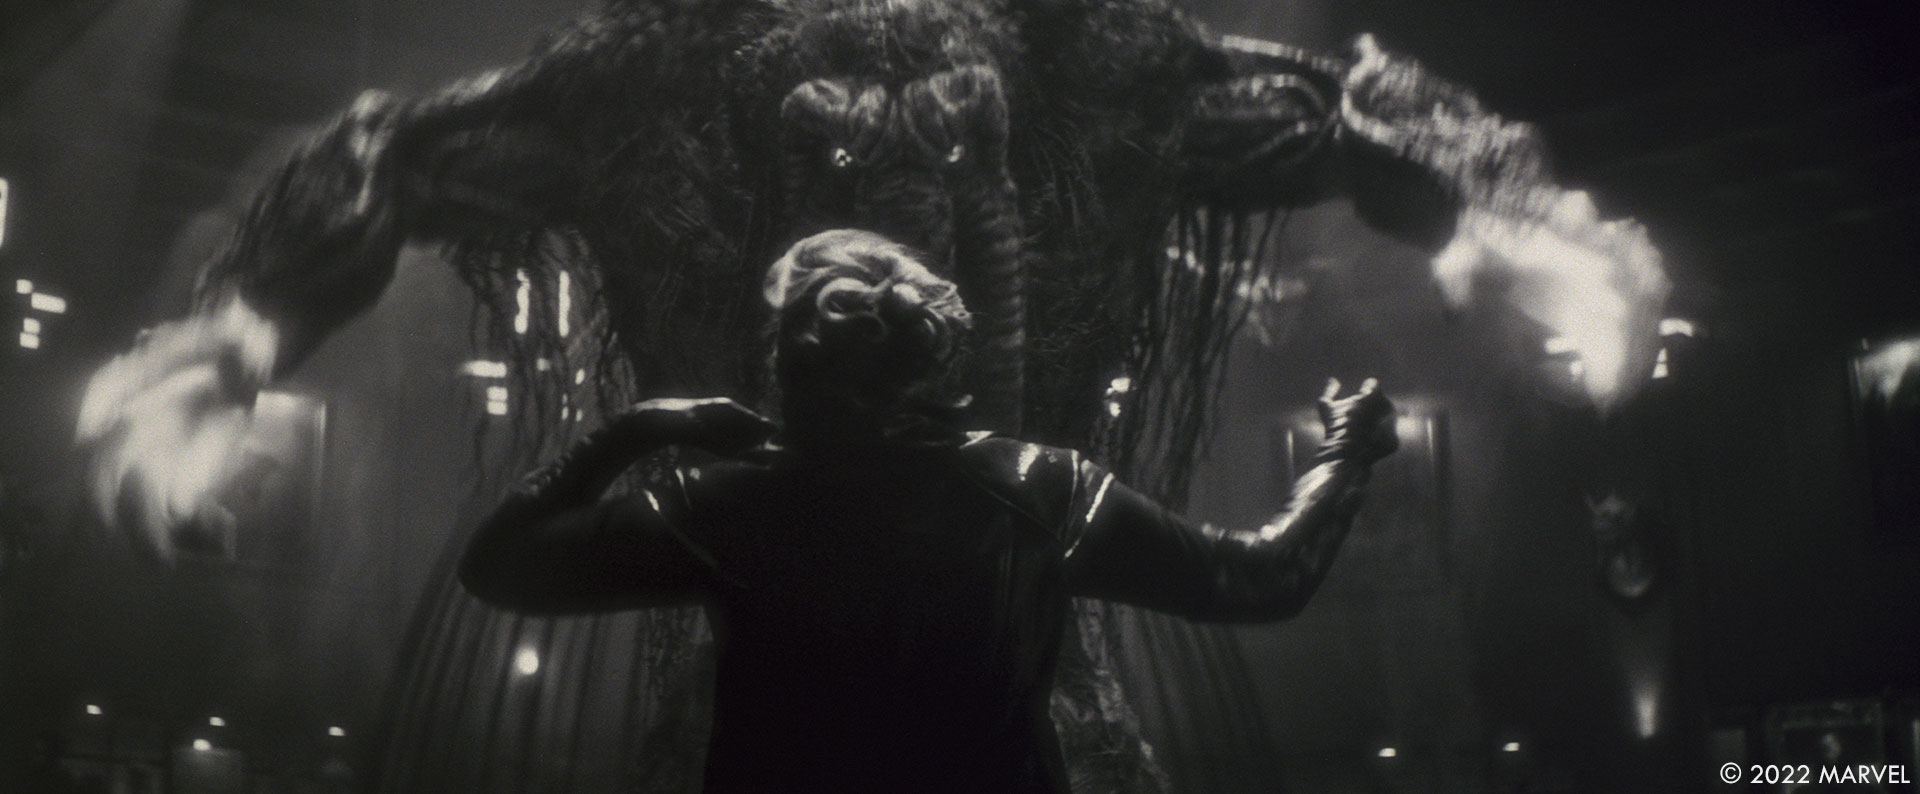 Werewolf by Night was Better in Black-and-White